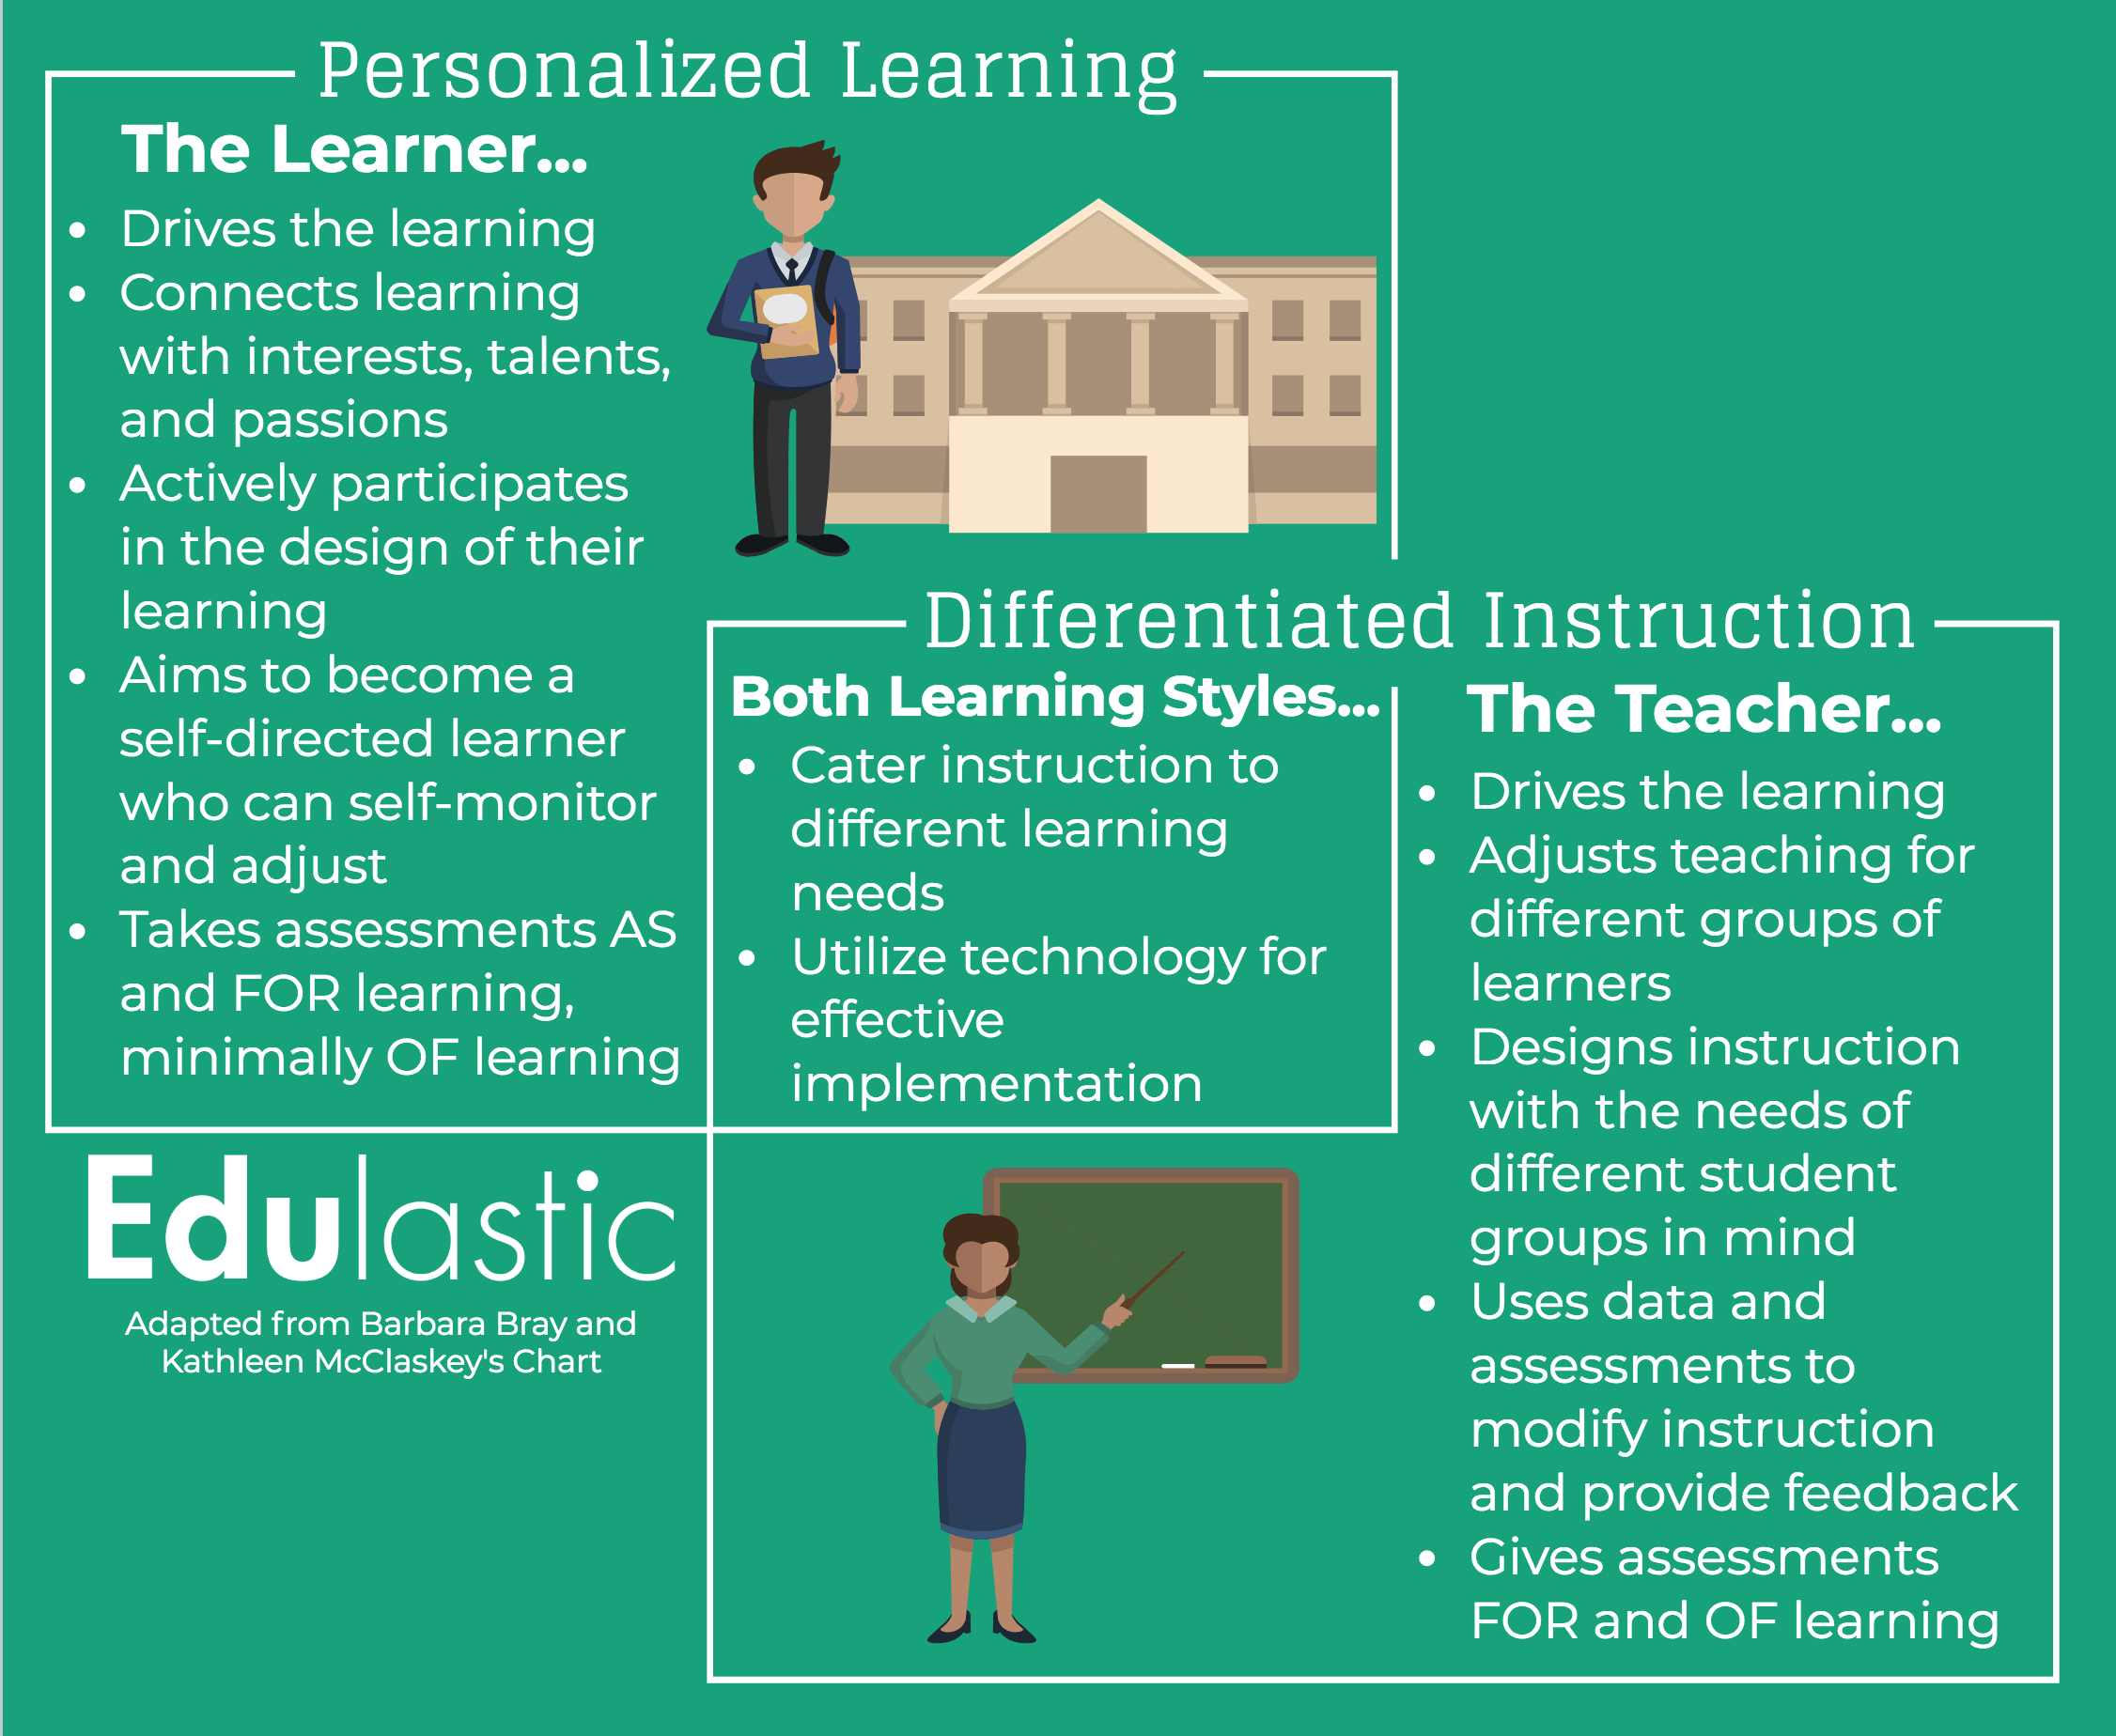 Differentiated Instruction - Empowering Students through Effective Teaching